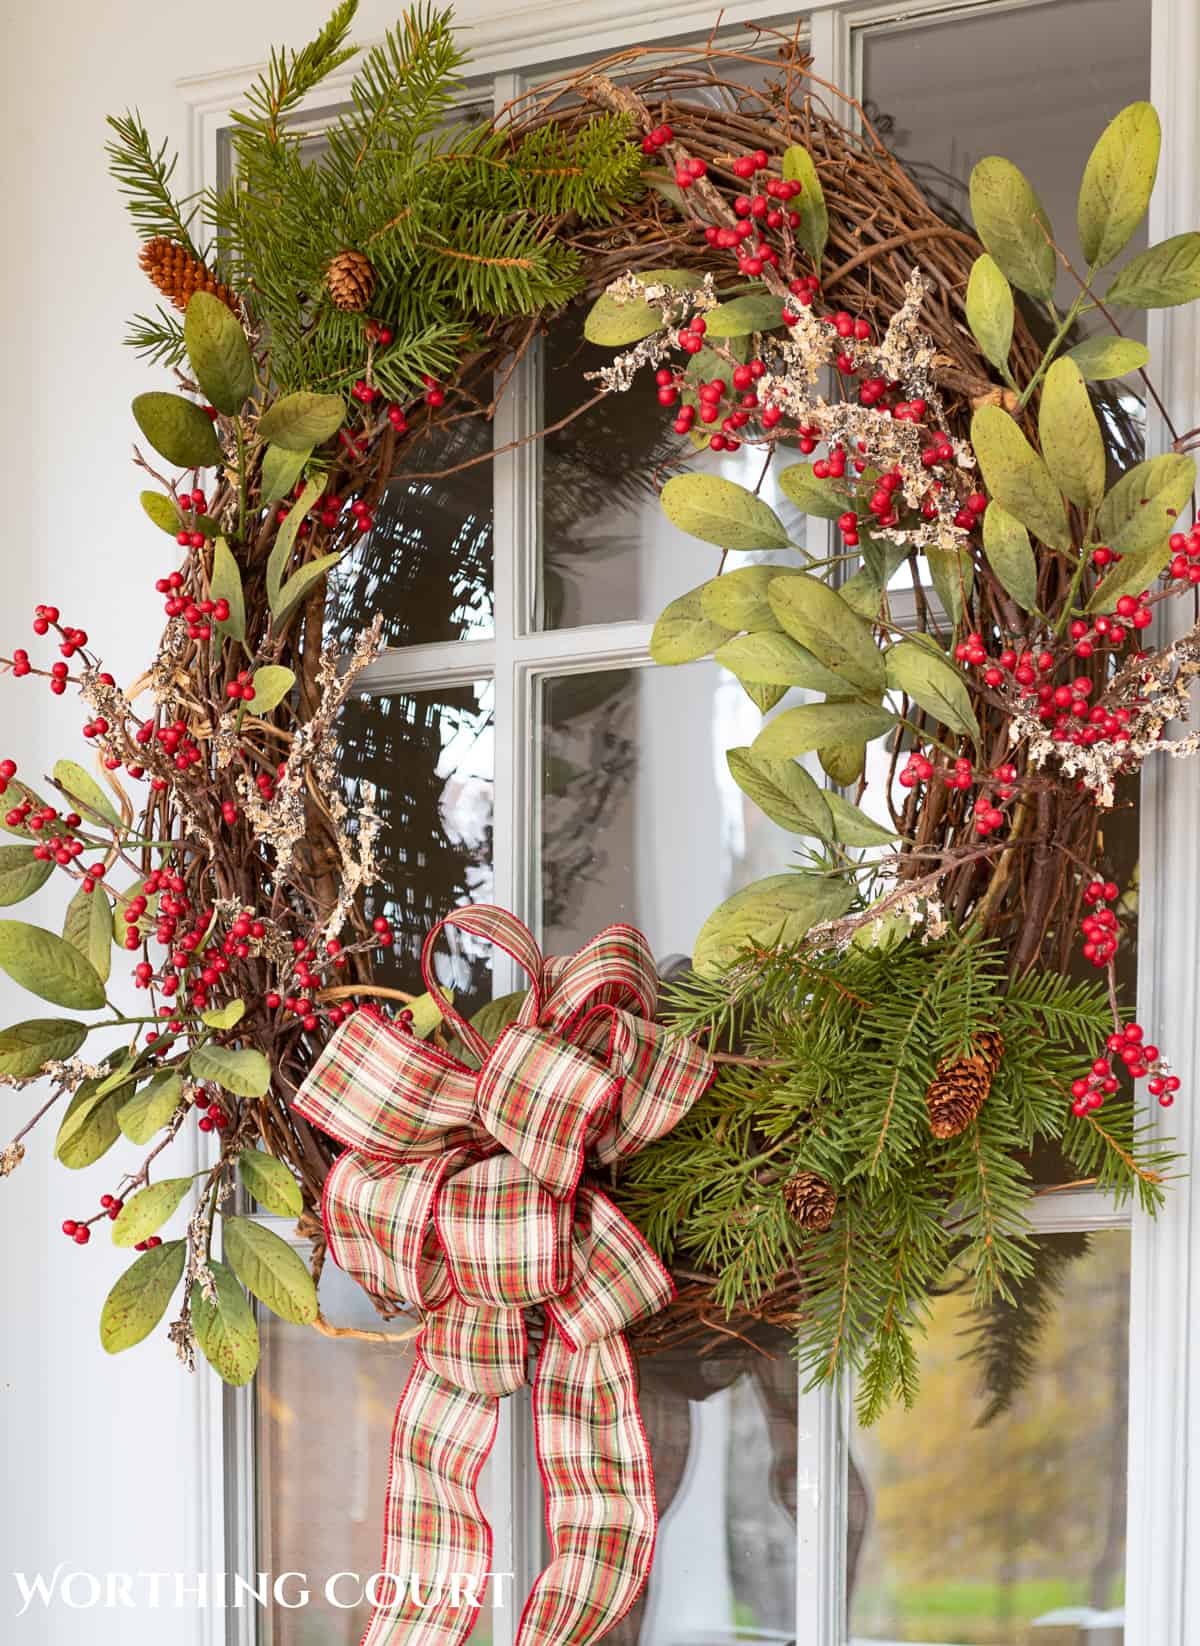 Christmas wreath with natural elements hanging on a front door with glass panes